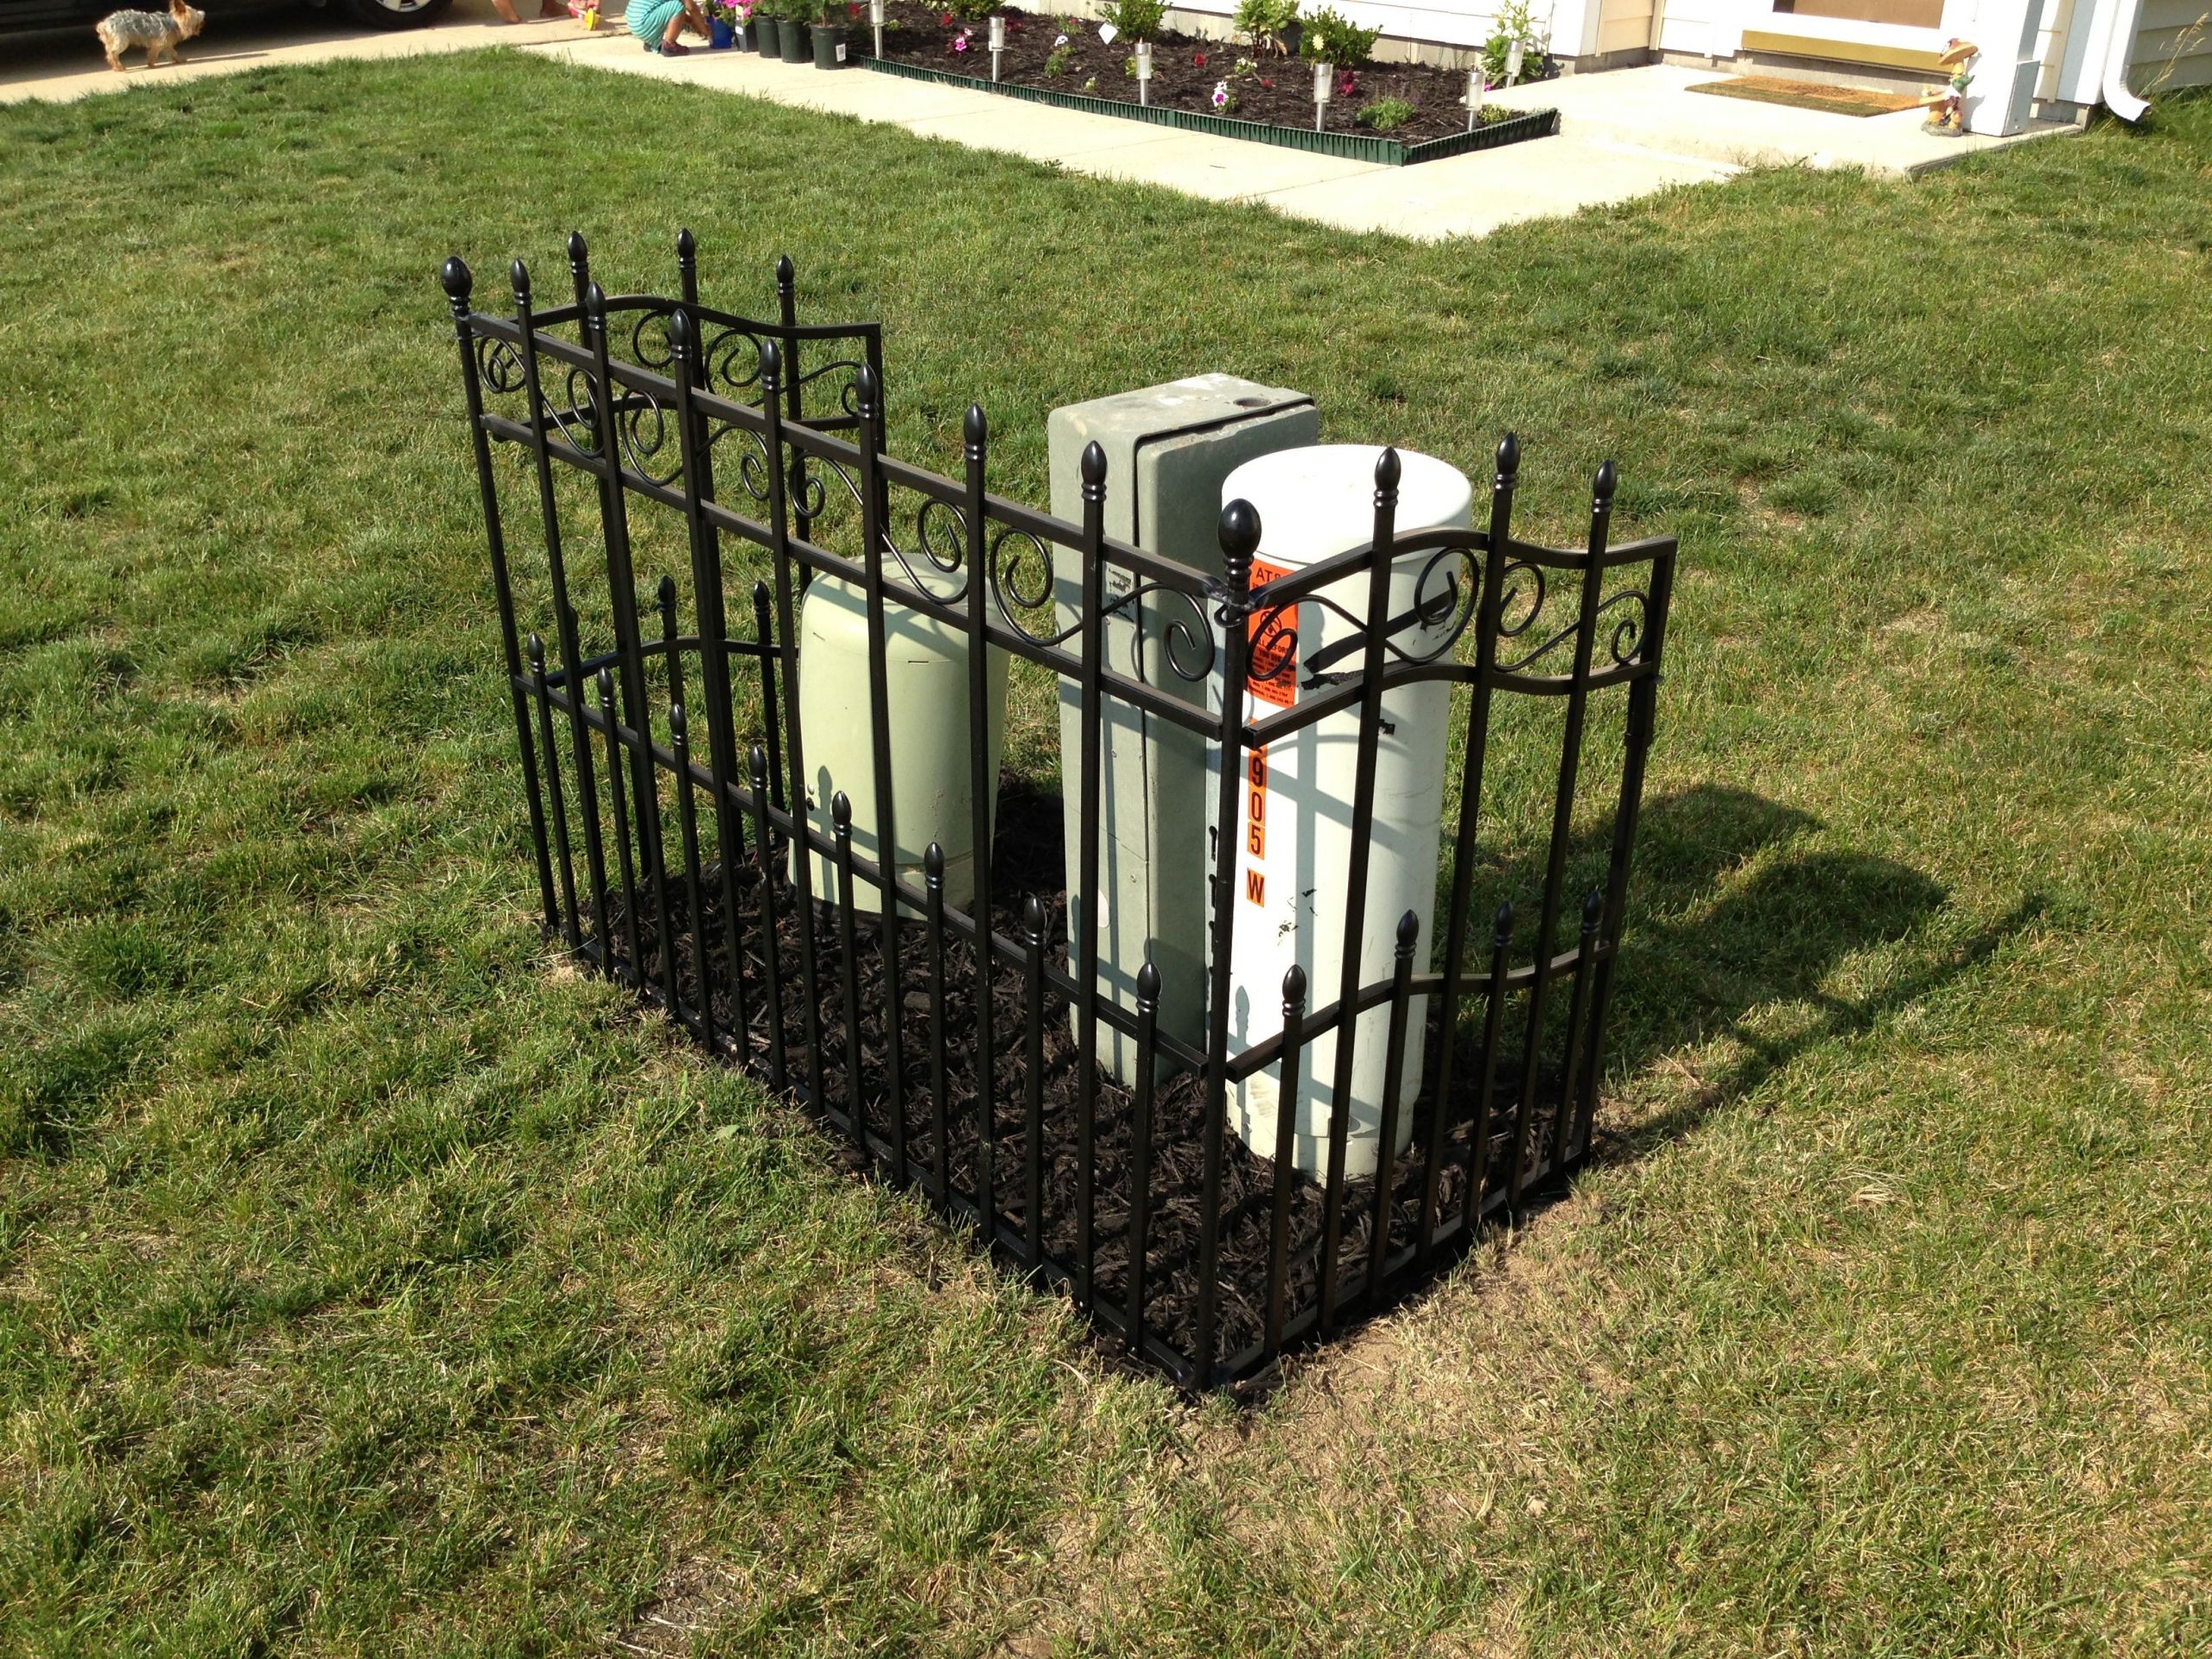 Outdoor Electrical Box Covers Landscaping
 Electric box cover up